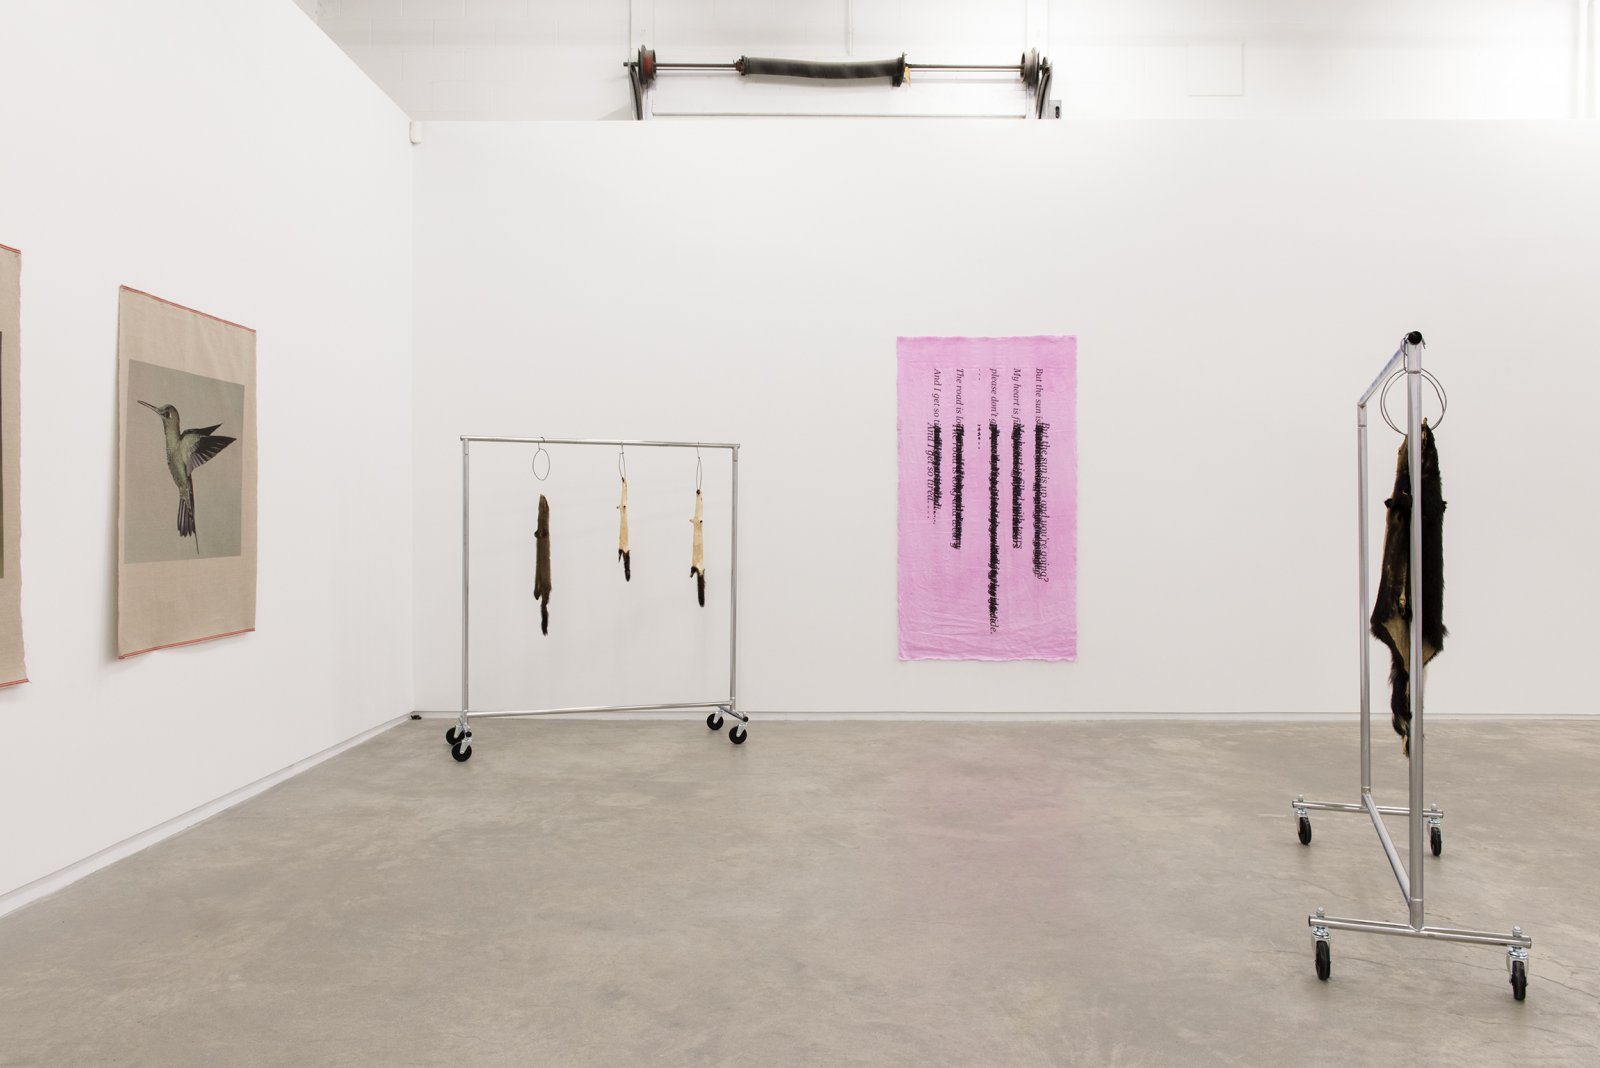 Duane Linklater, installation view, But the sun is up and you're going?, Catriona Jeffries, 2014 by Duane Linklater